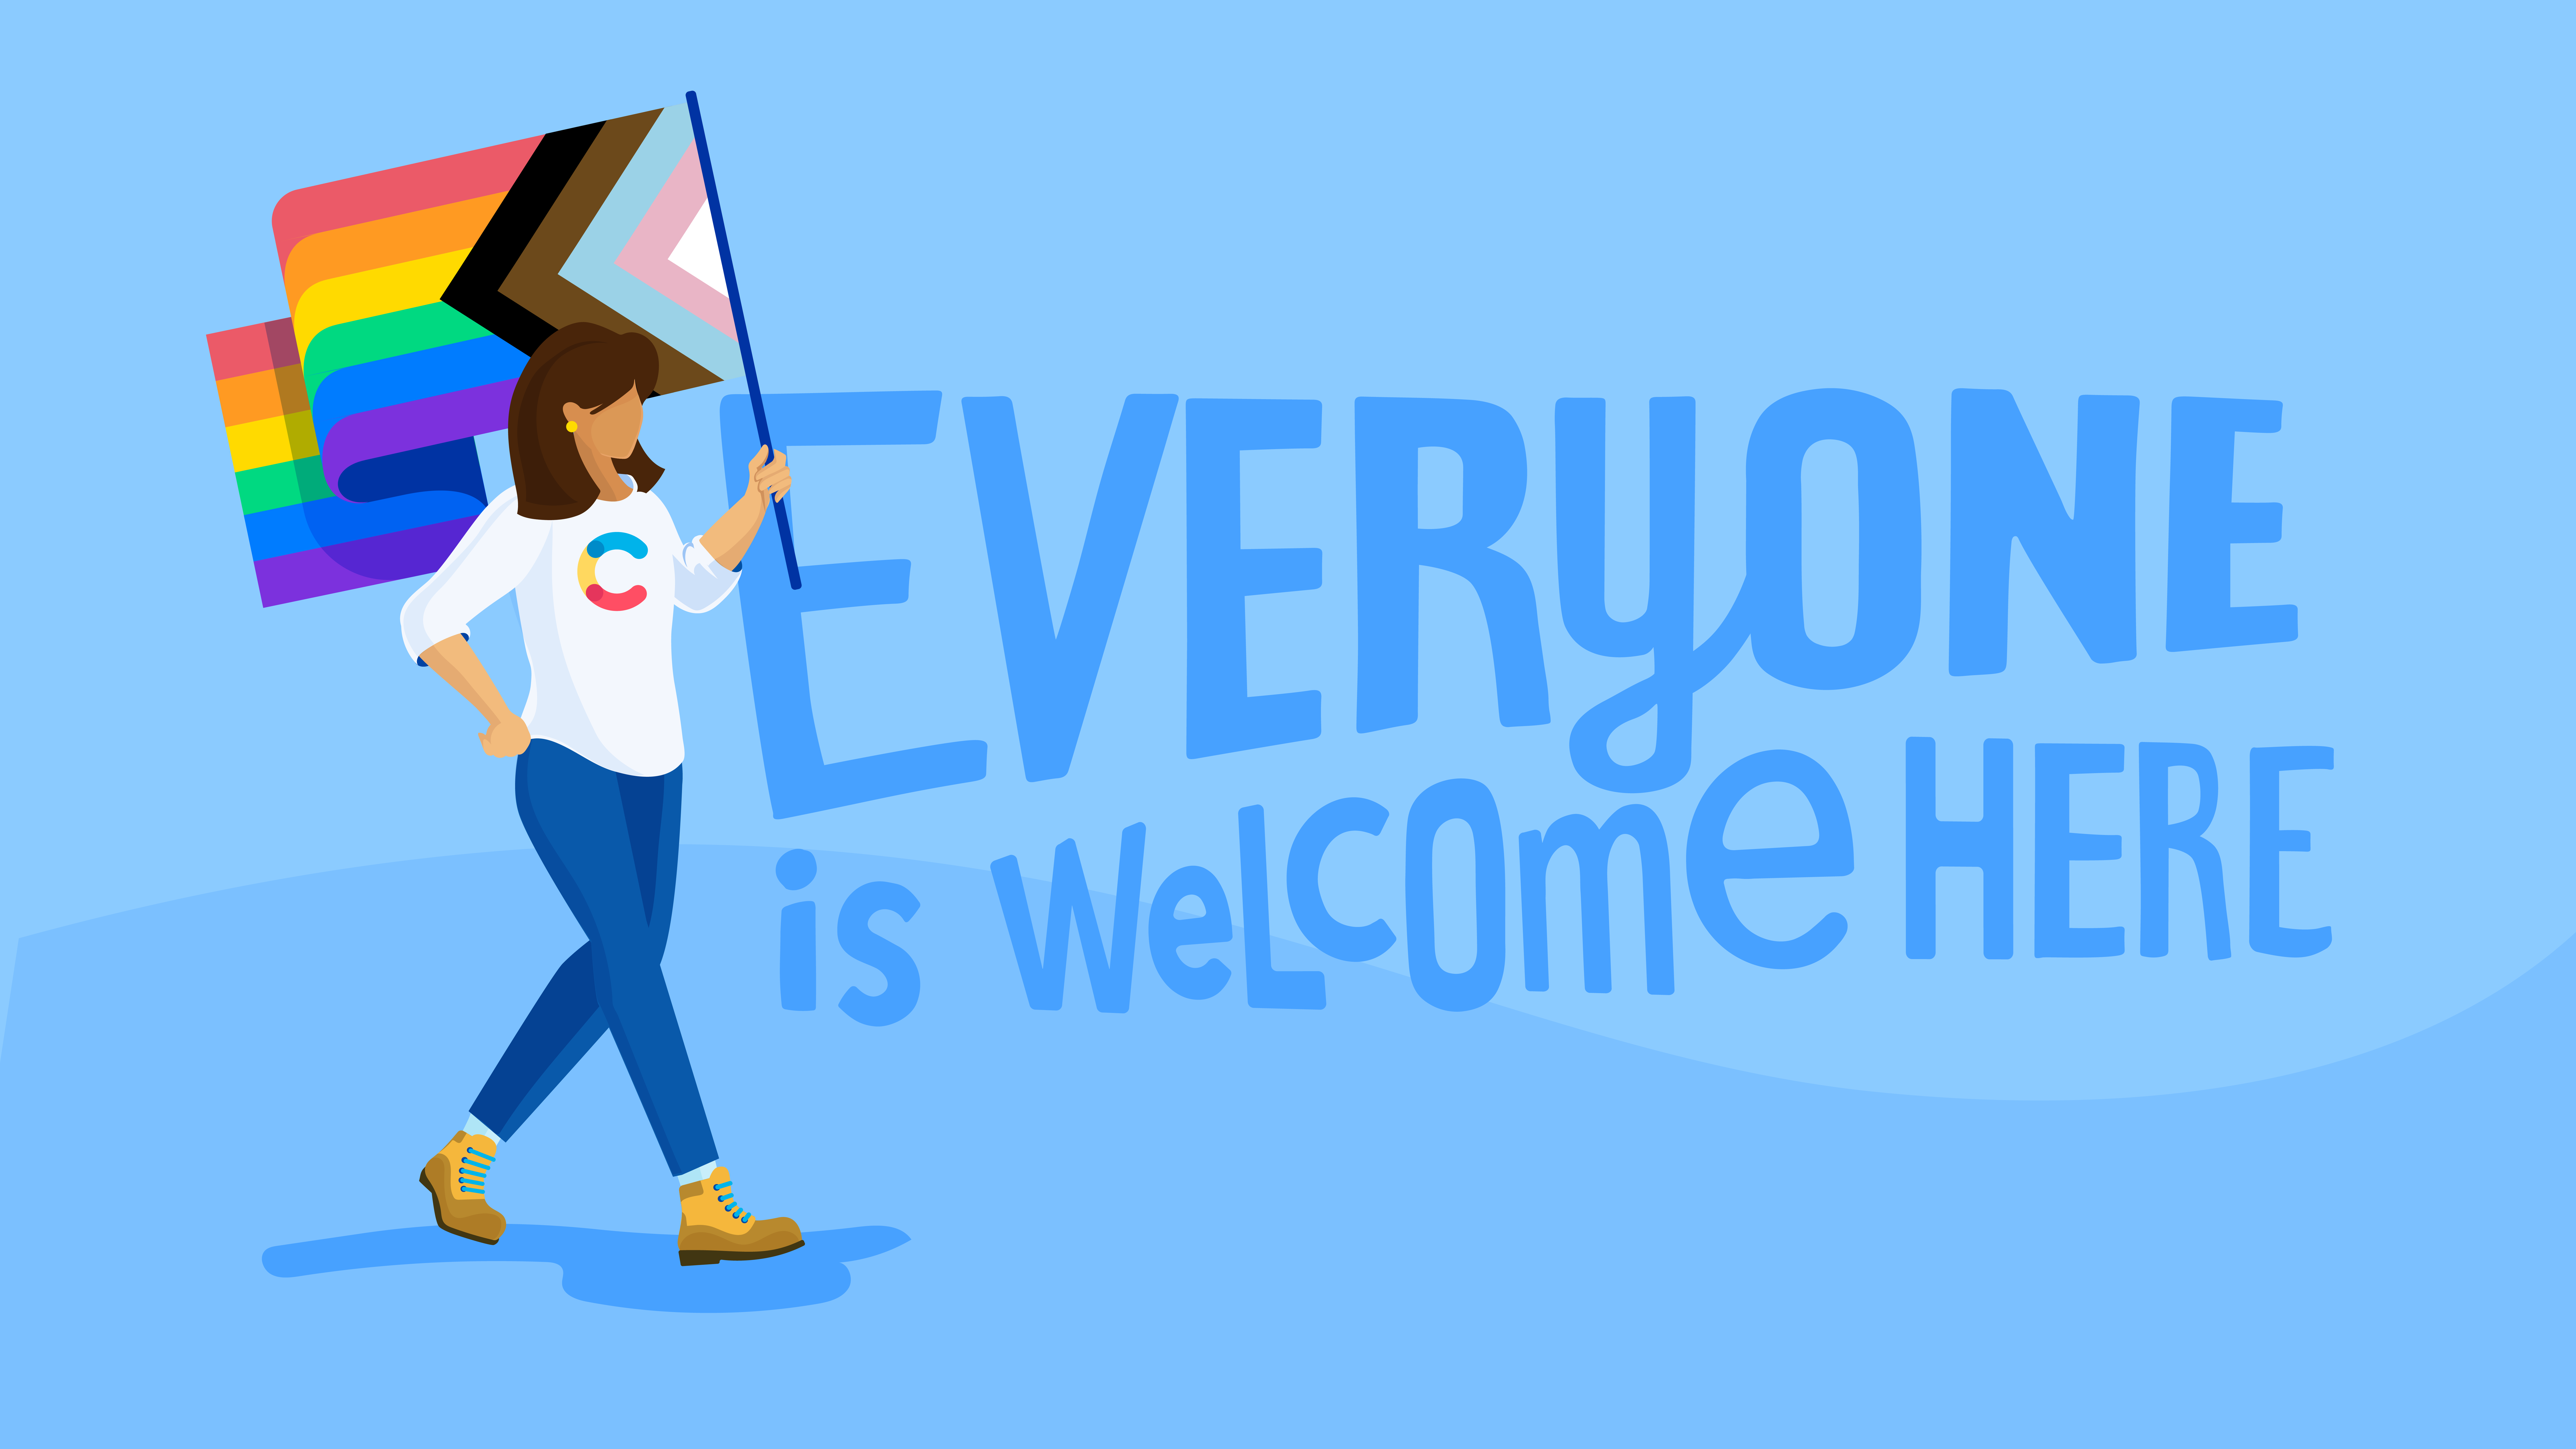 An image saying "Everyone is welcome here"